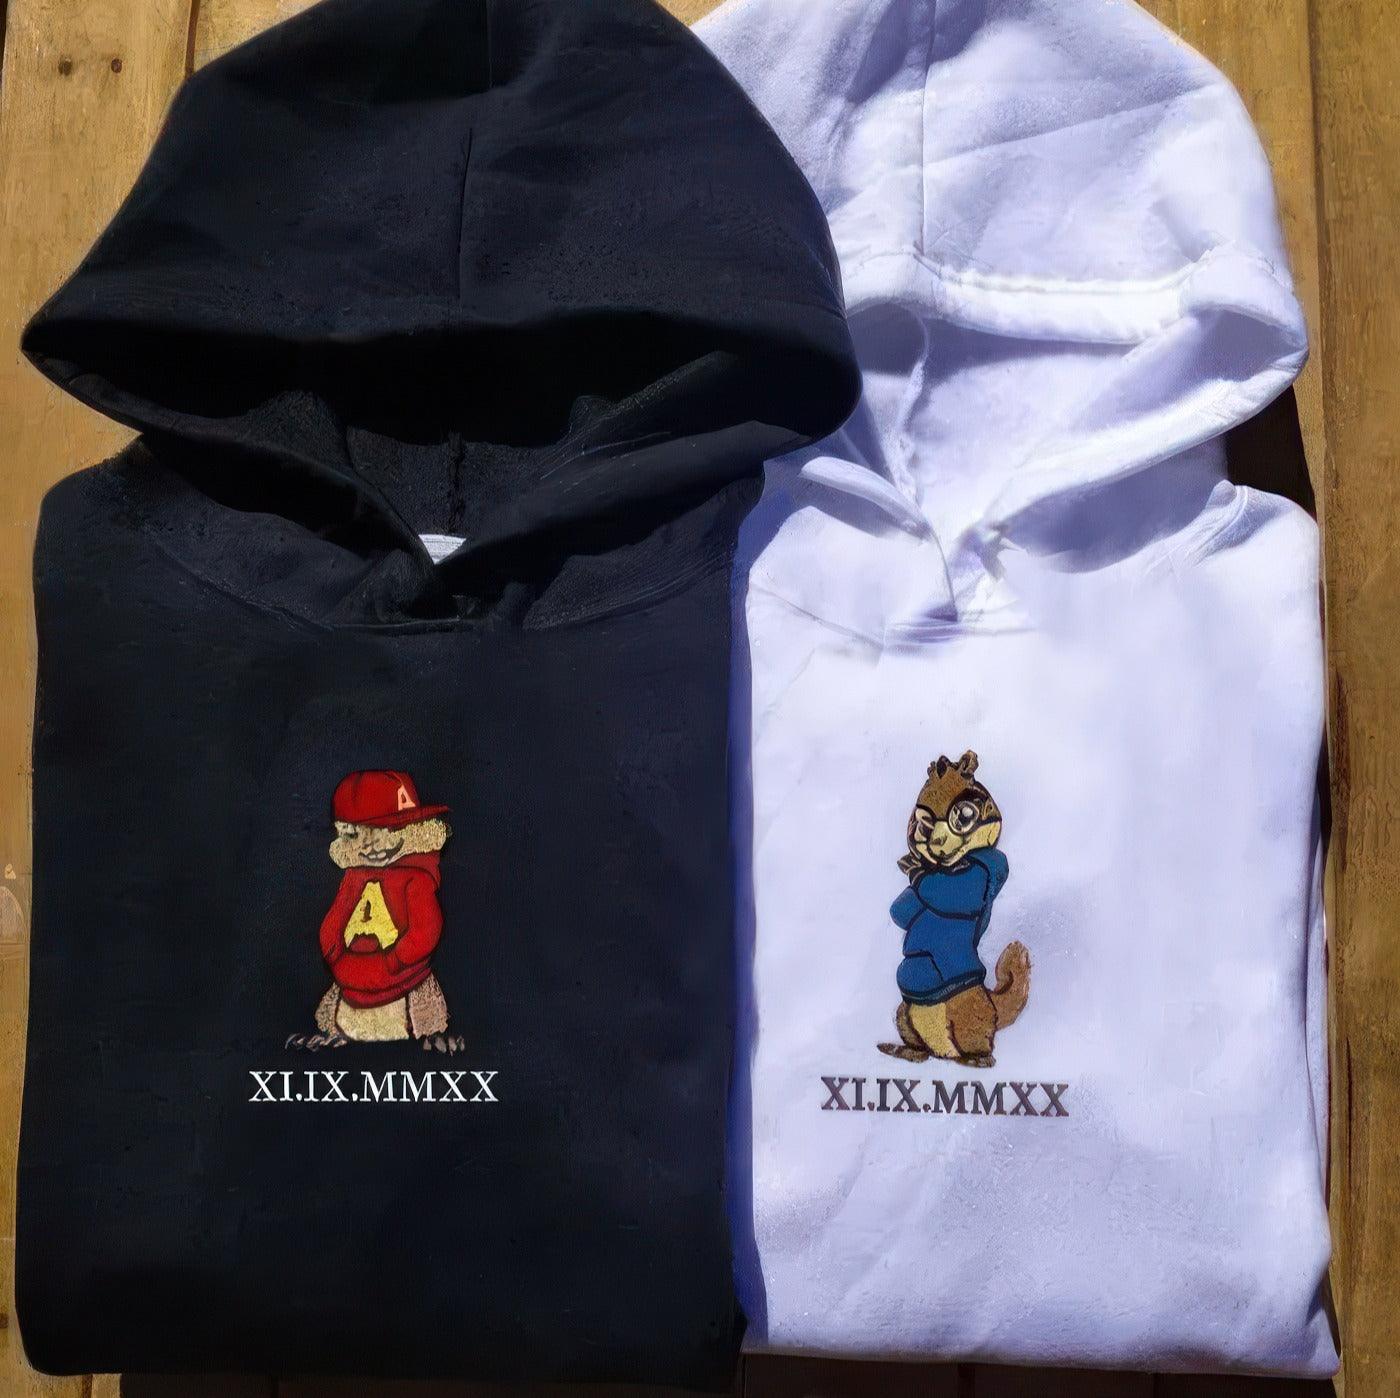 Custom Embroidered Hoodies For Couples, Best Matching Hoodies For Couples, Cute Chipmunks Cartoons Character Embroidery Sweatshirt